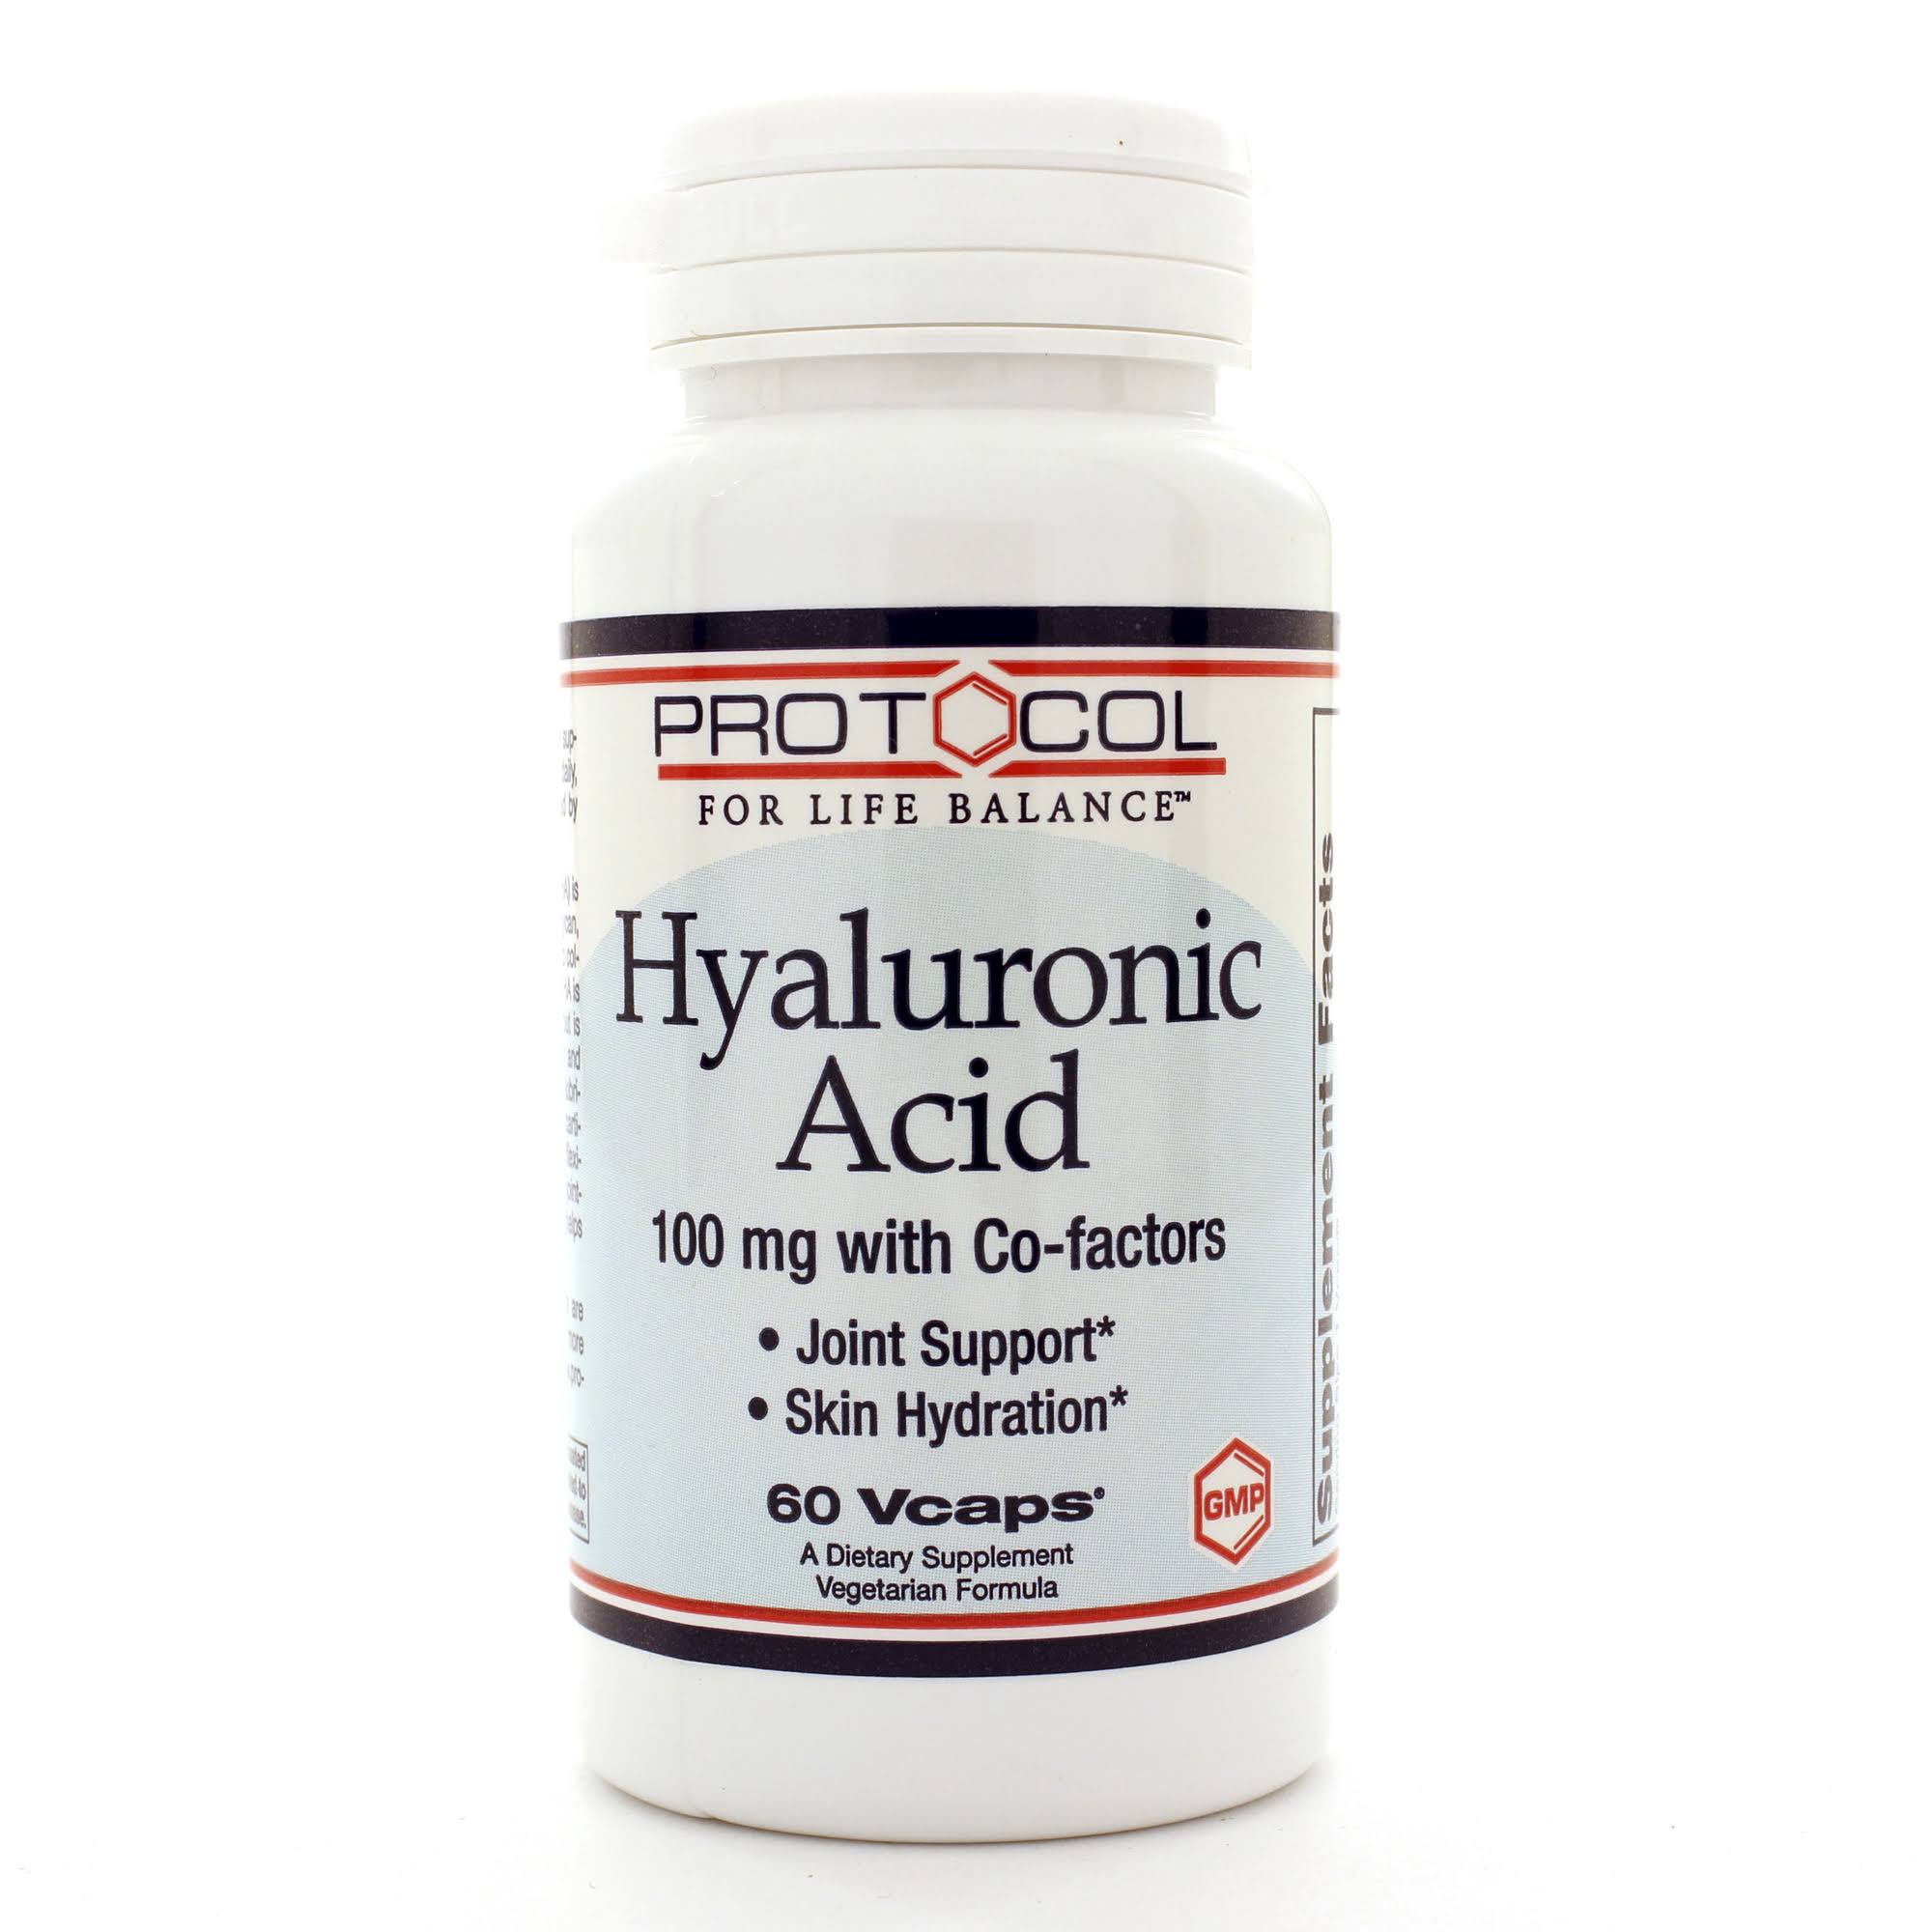 Protocol For Life Balance Hyaluronic Acid Supplement - 100mg, 60 Vegetable Capsules